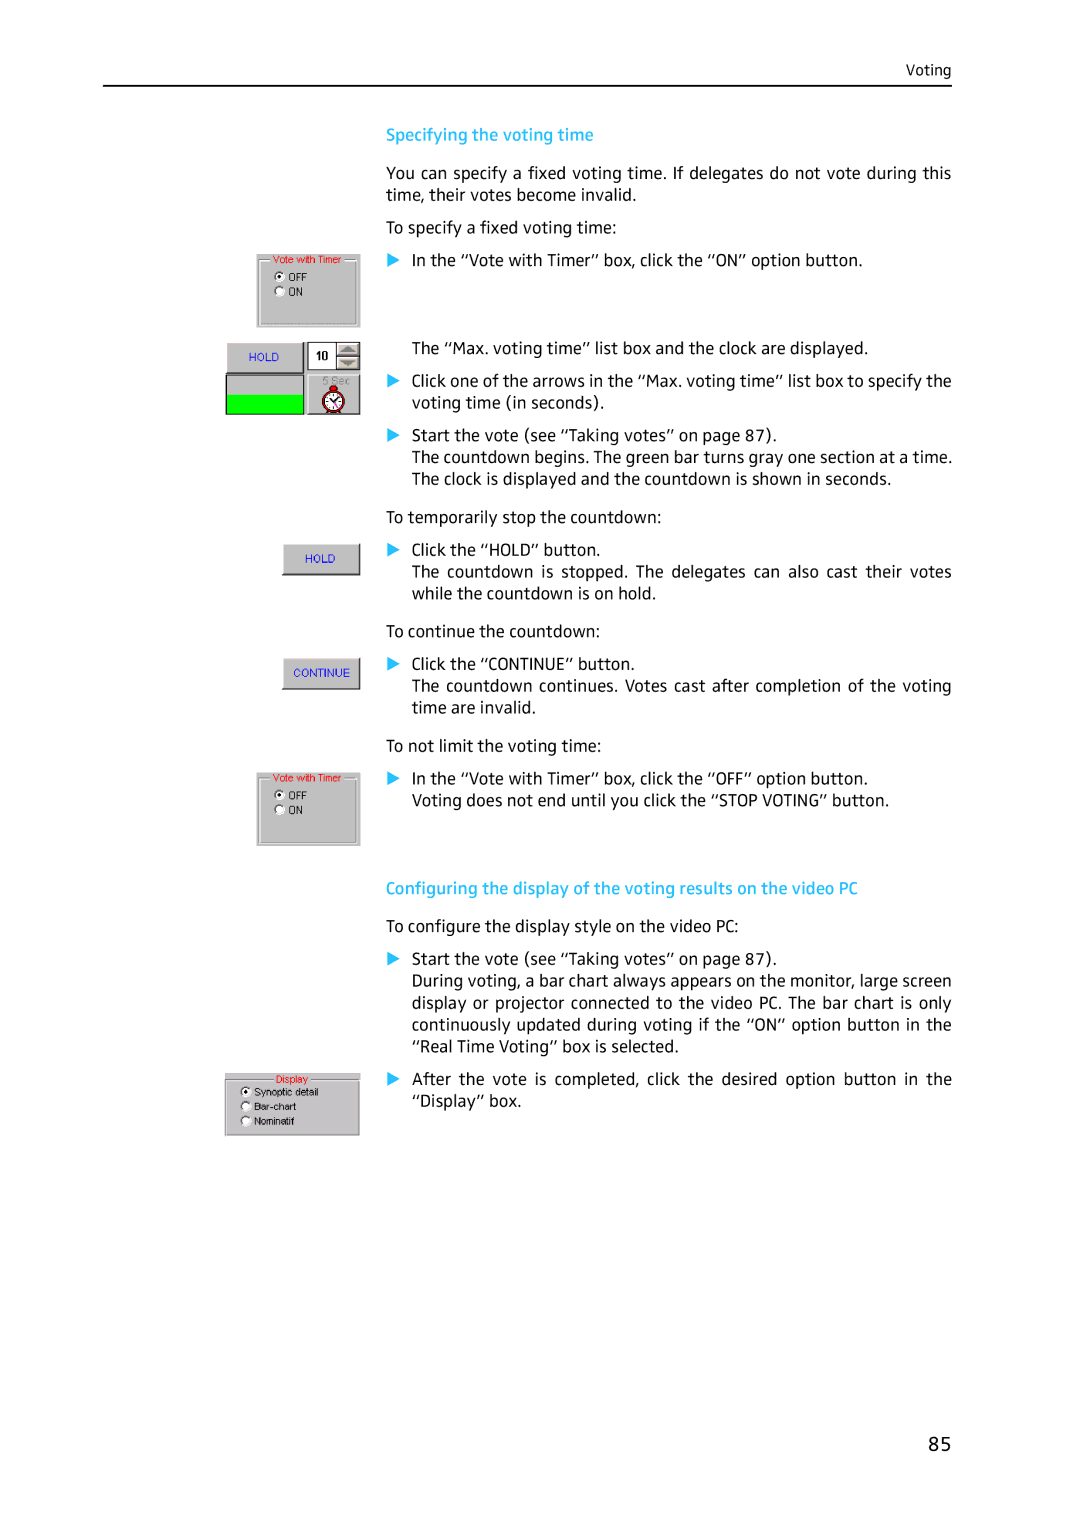 Sennheiser SDC 8200 SYS-M software manual Specifying the voting time 